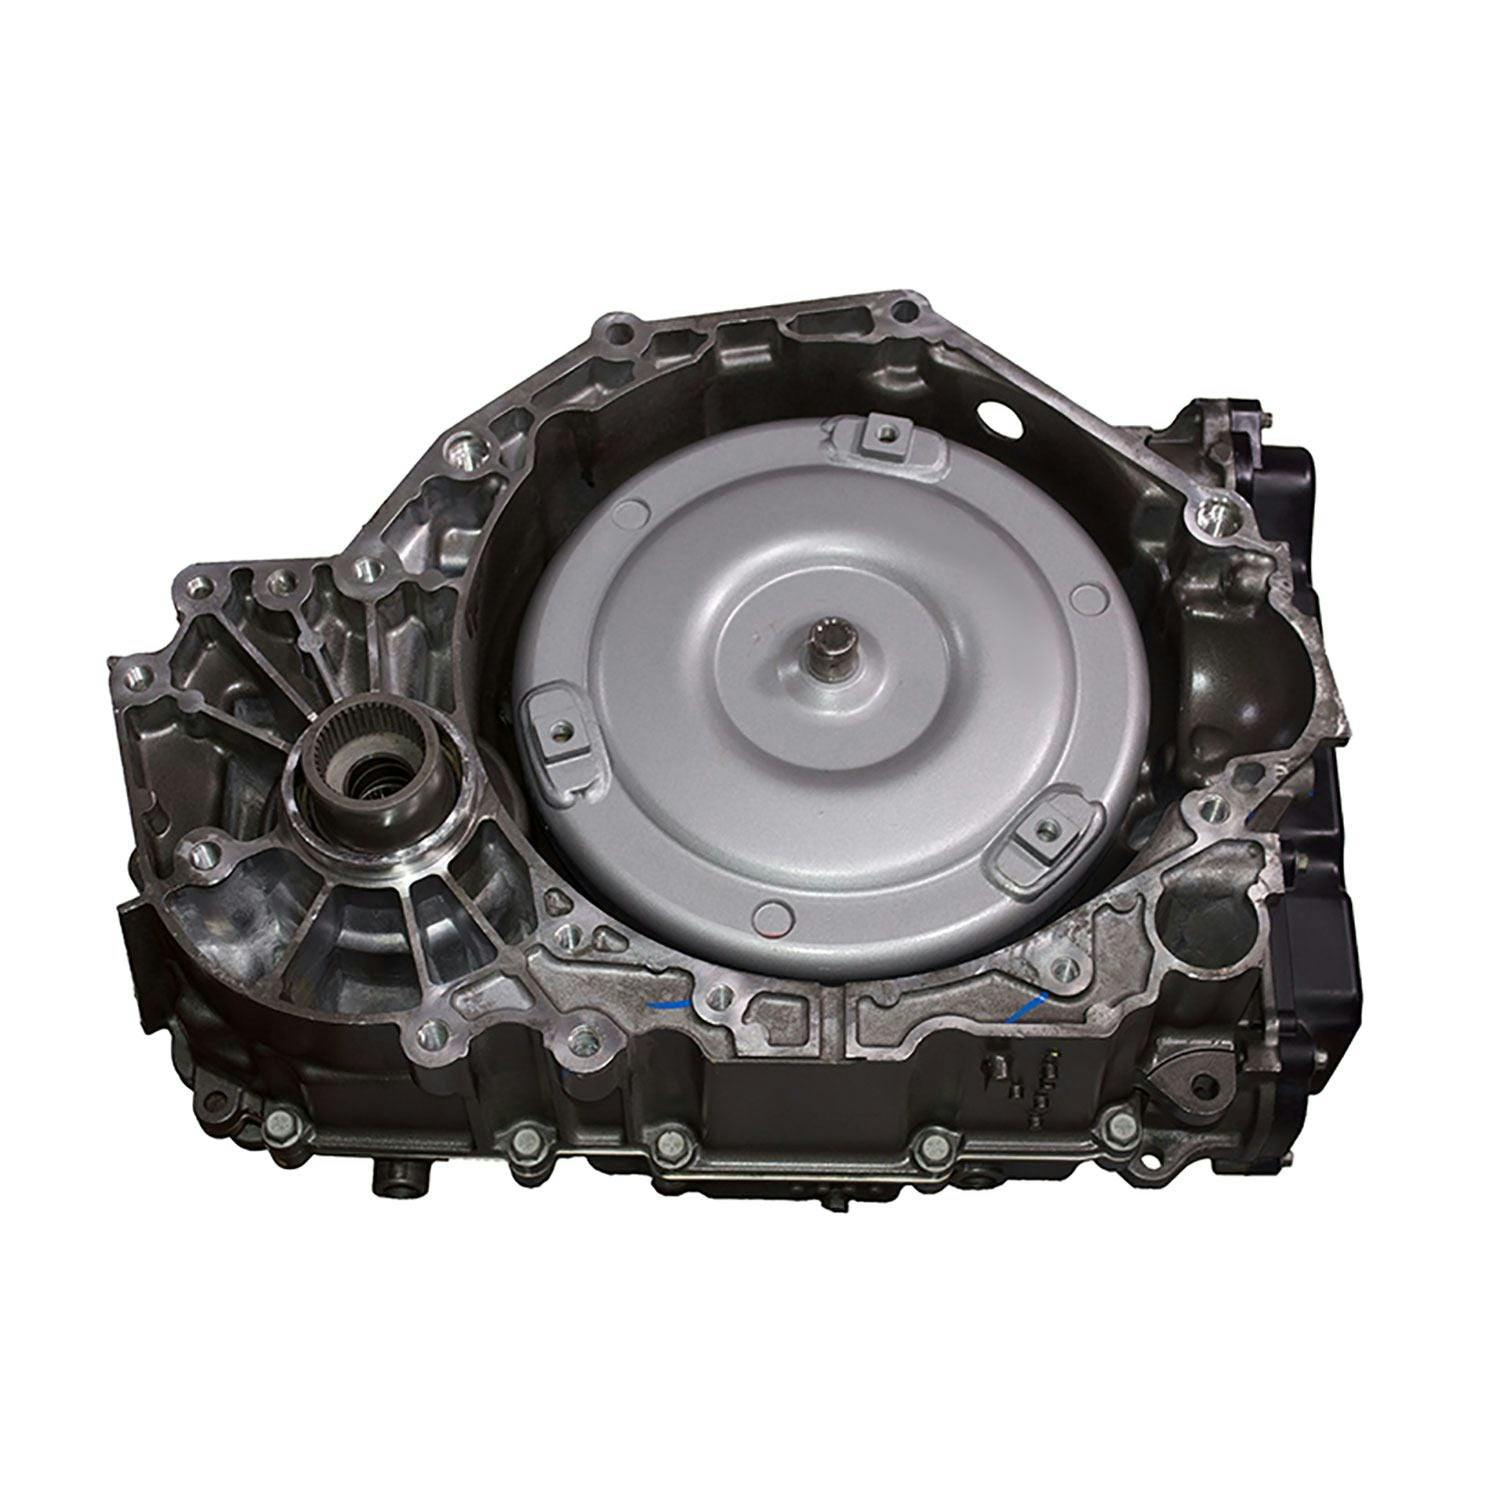 Automatic Transmission for 2011 Buick LaCrosse, Regal, Allure/Chevrolet Equinox/GMC Terrain FWD with 2.4L Inline-4 Engine